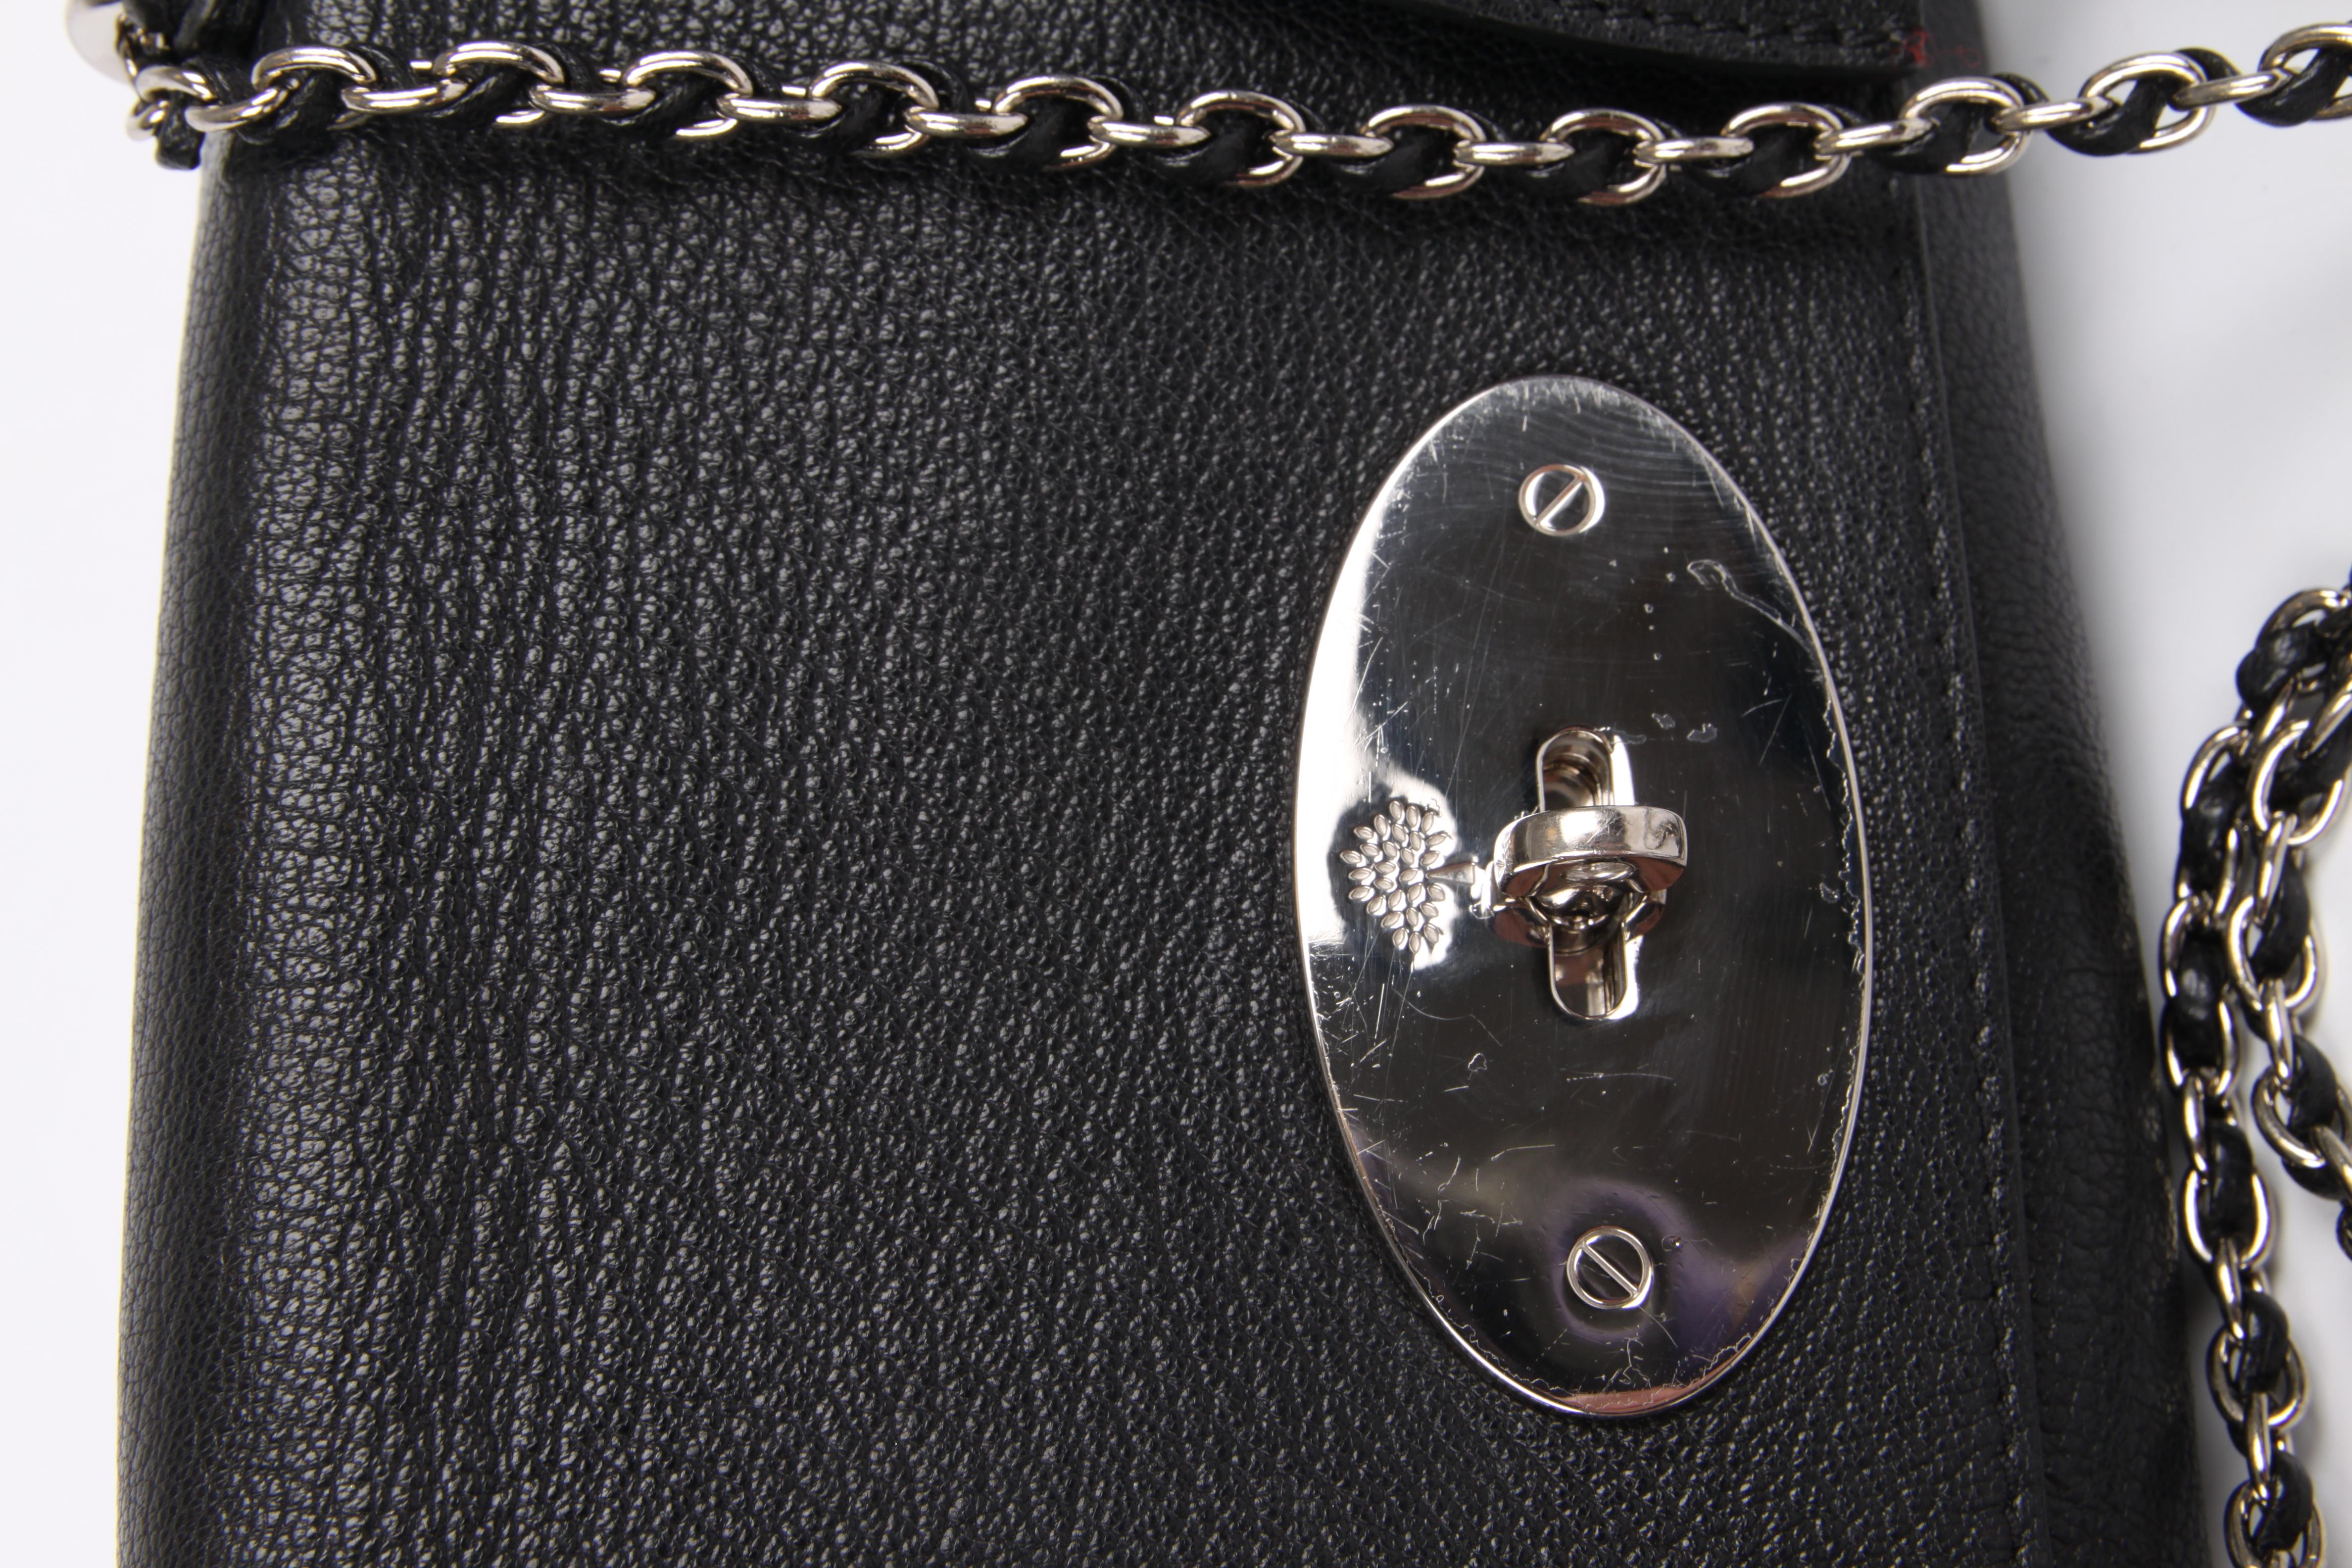 Lily is a stylish bag by Mulberry, elegant and timeless.

Crafted from black 'grained' leather with silver-tone hardware. Front closure is of course embellished with the wel-known Mulberry tree. A clochette with lock is hanging down from the